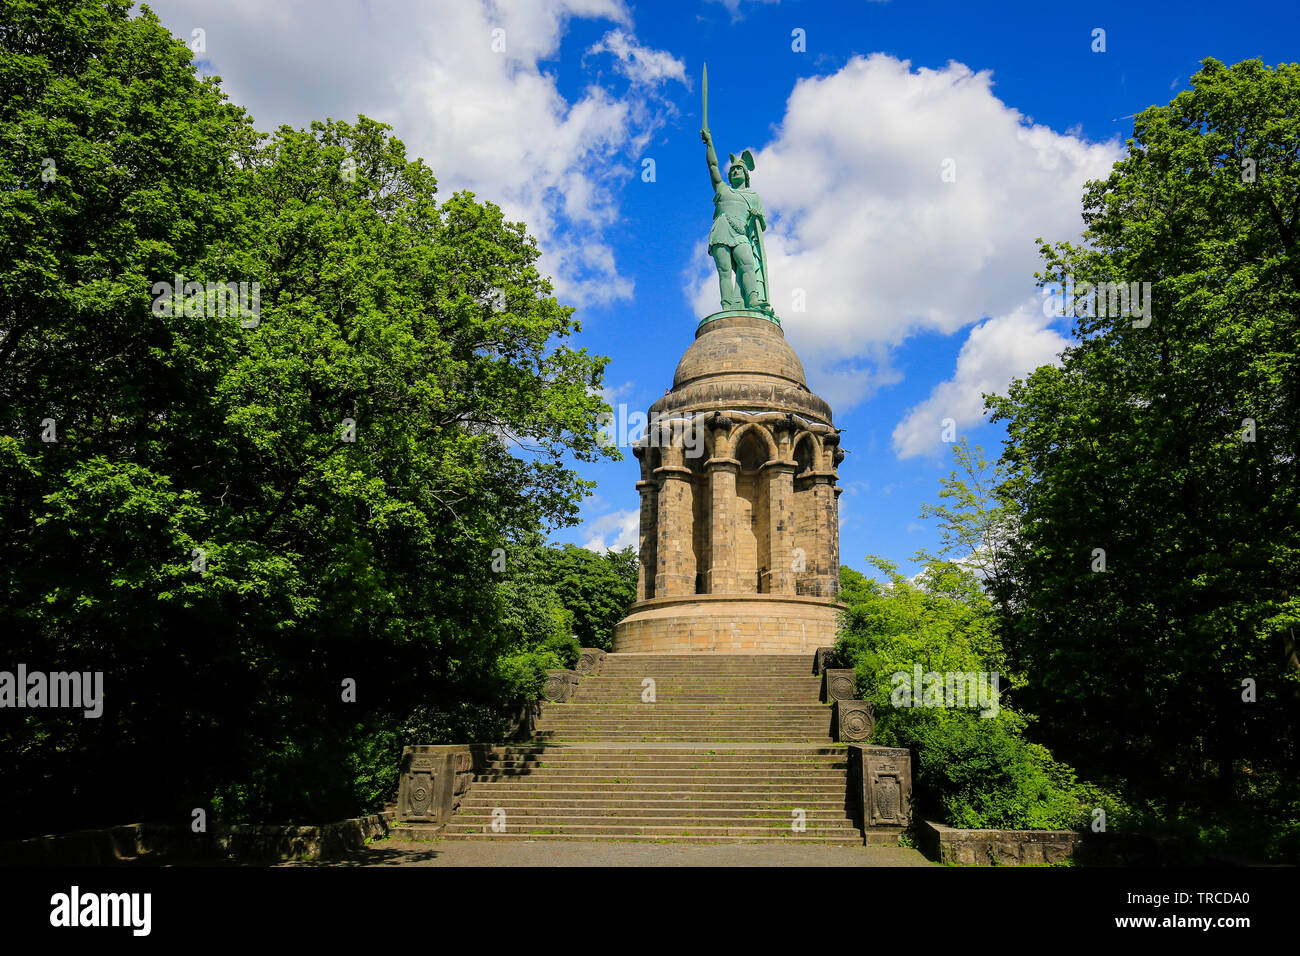 Detmold, Lipperland, North Rhine-Westphalia, Germany - Hermannsdenkmal, in memory of the Cheruscan Founder Arminius, is the highest statue in Germany. Stock Photo